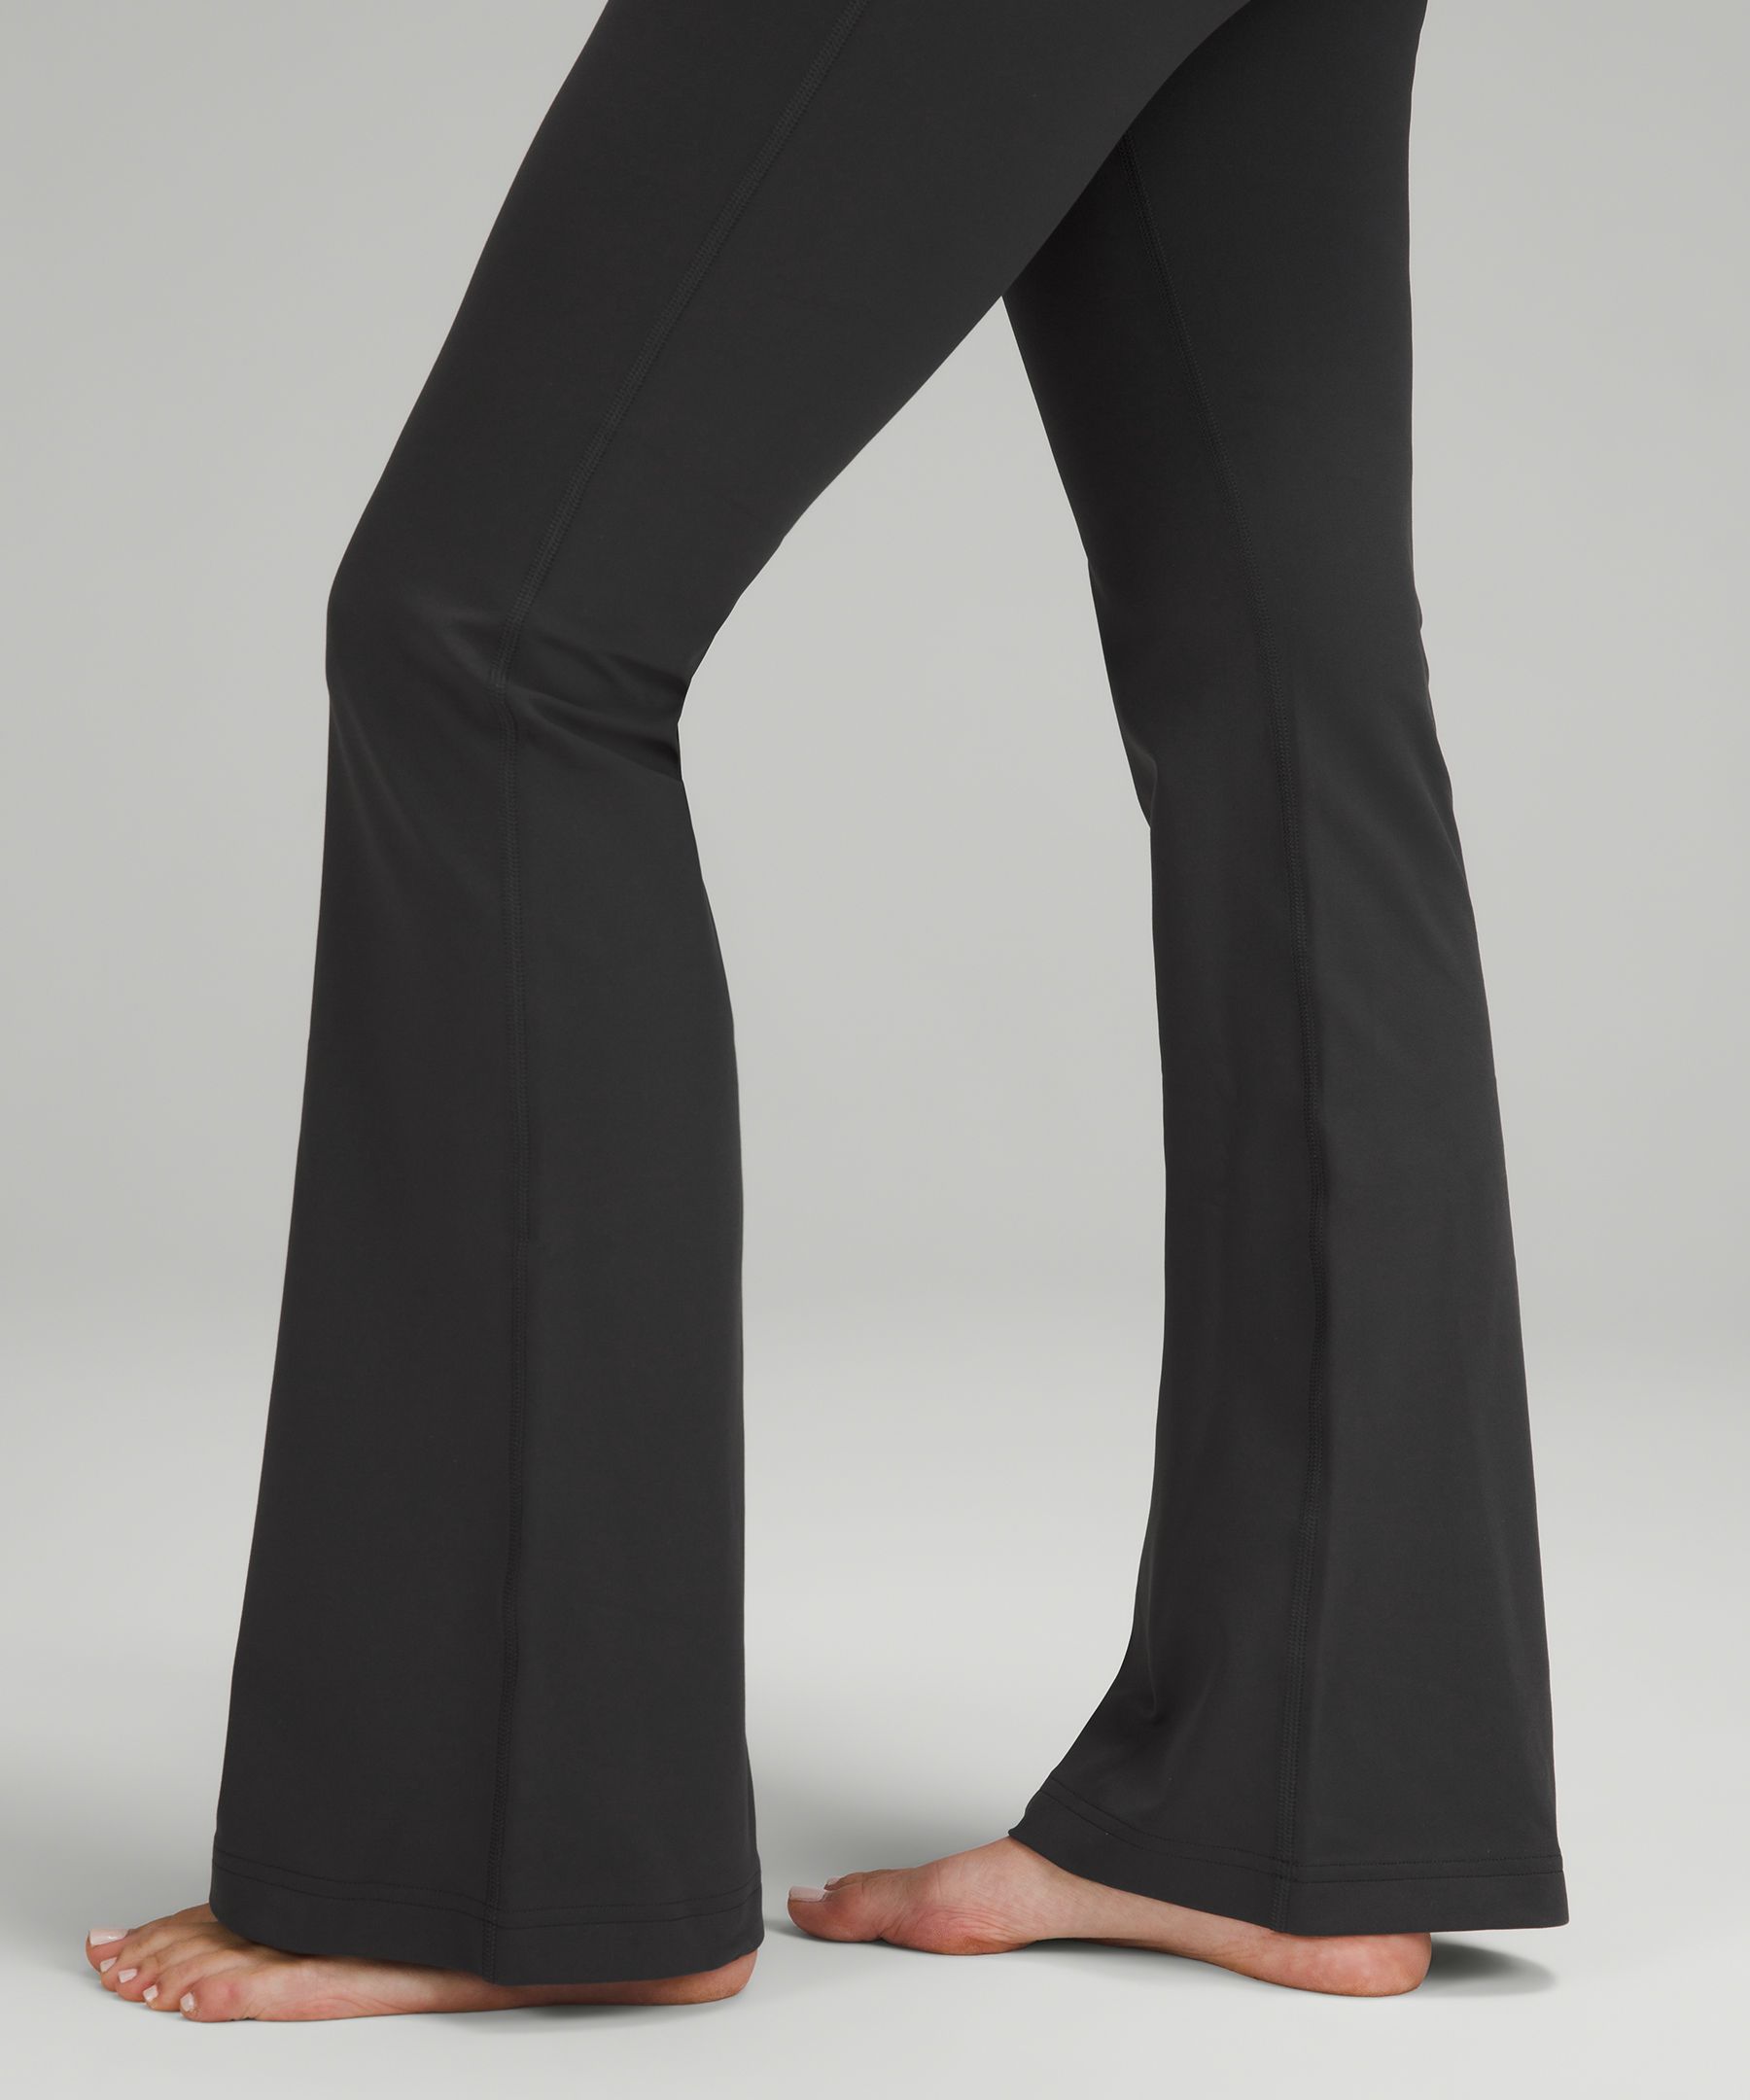 Groove Super-High-Rise Flared Pant Nulu Asia Fit Black, Women's Fashion,  Activewear on Carousell